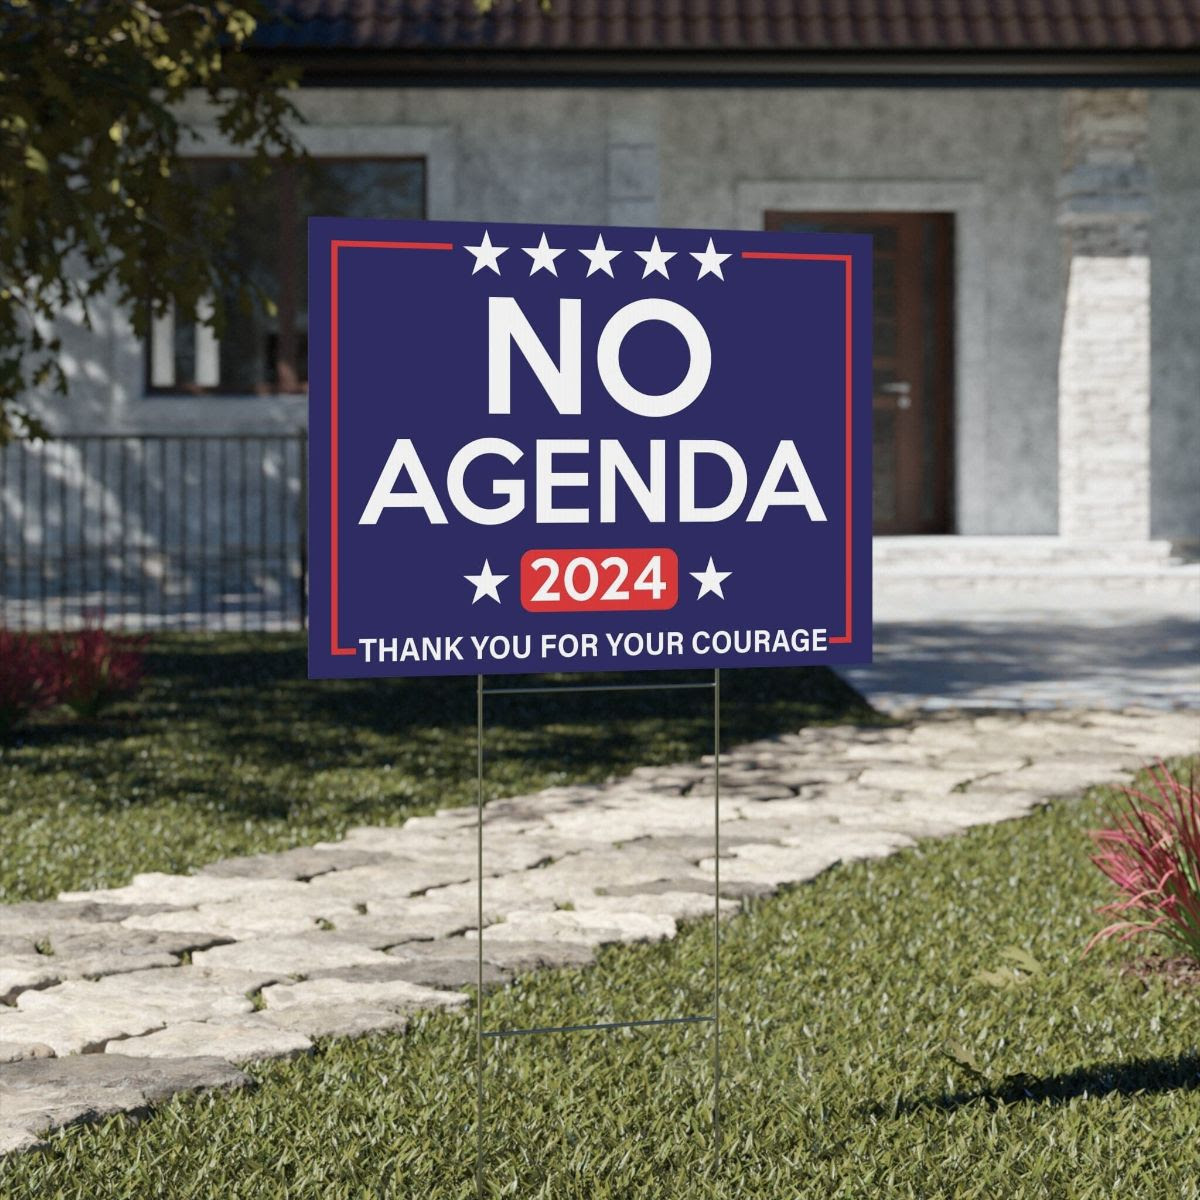 Lawn political sign promoting No Agenda.